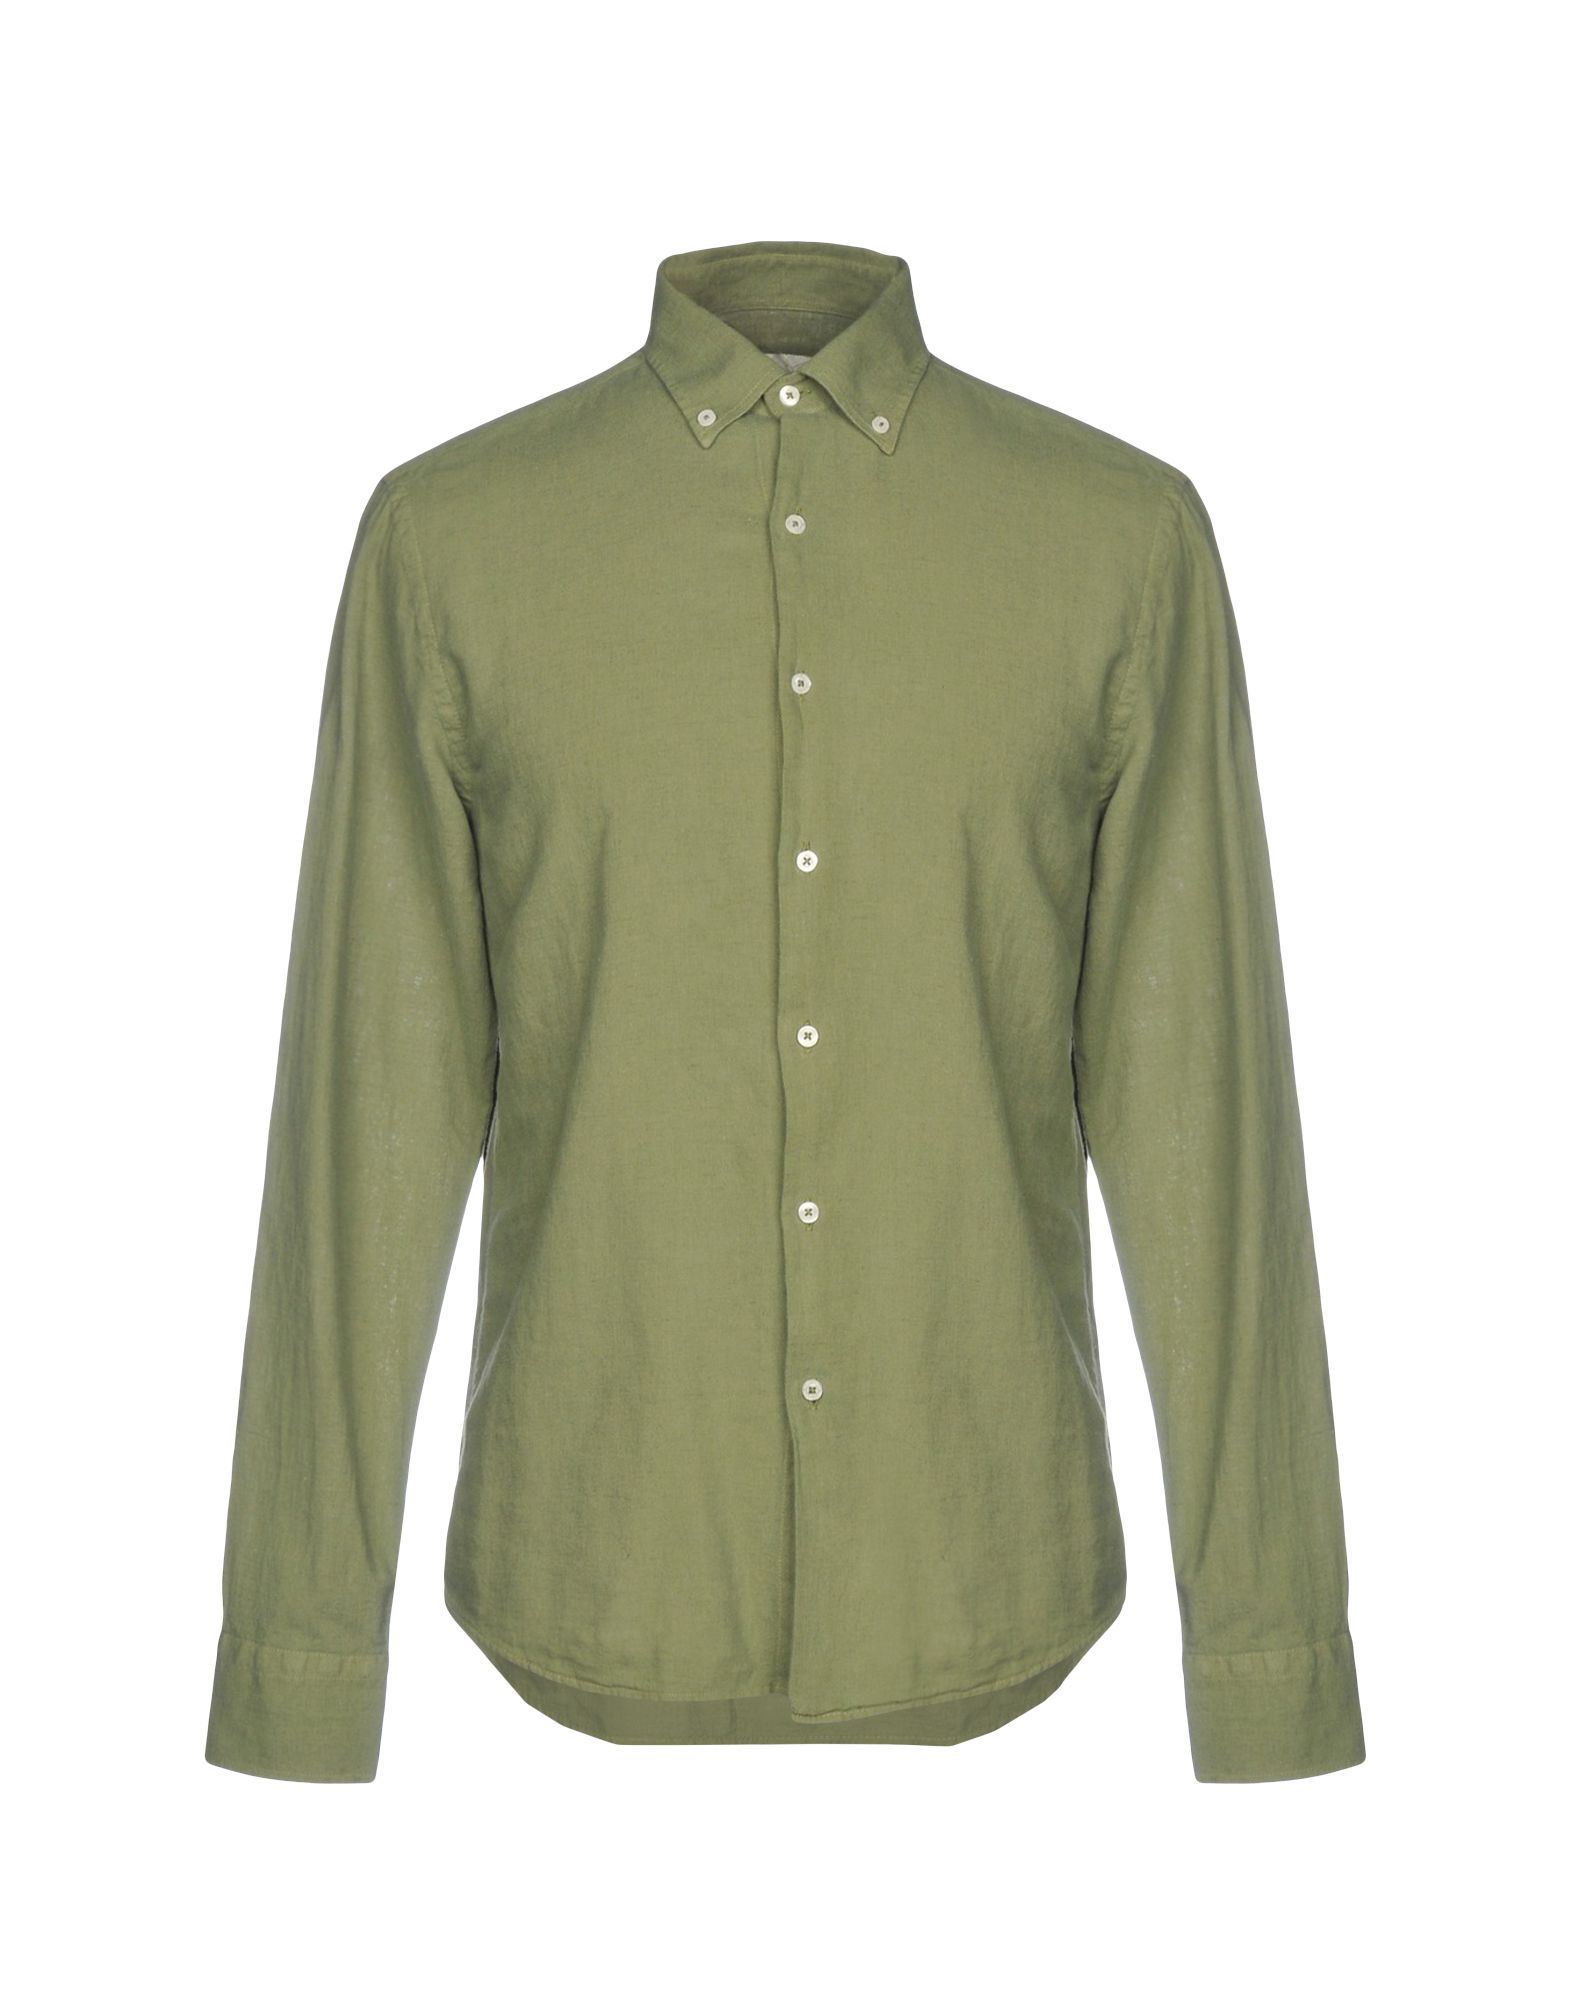 plain weave, embroidered detailing, logo, basic solid colour, front closure, button closing, long sleeves, buttoned cuffs, button-down collar, no pockets